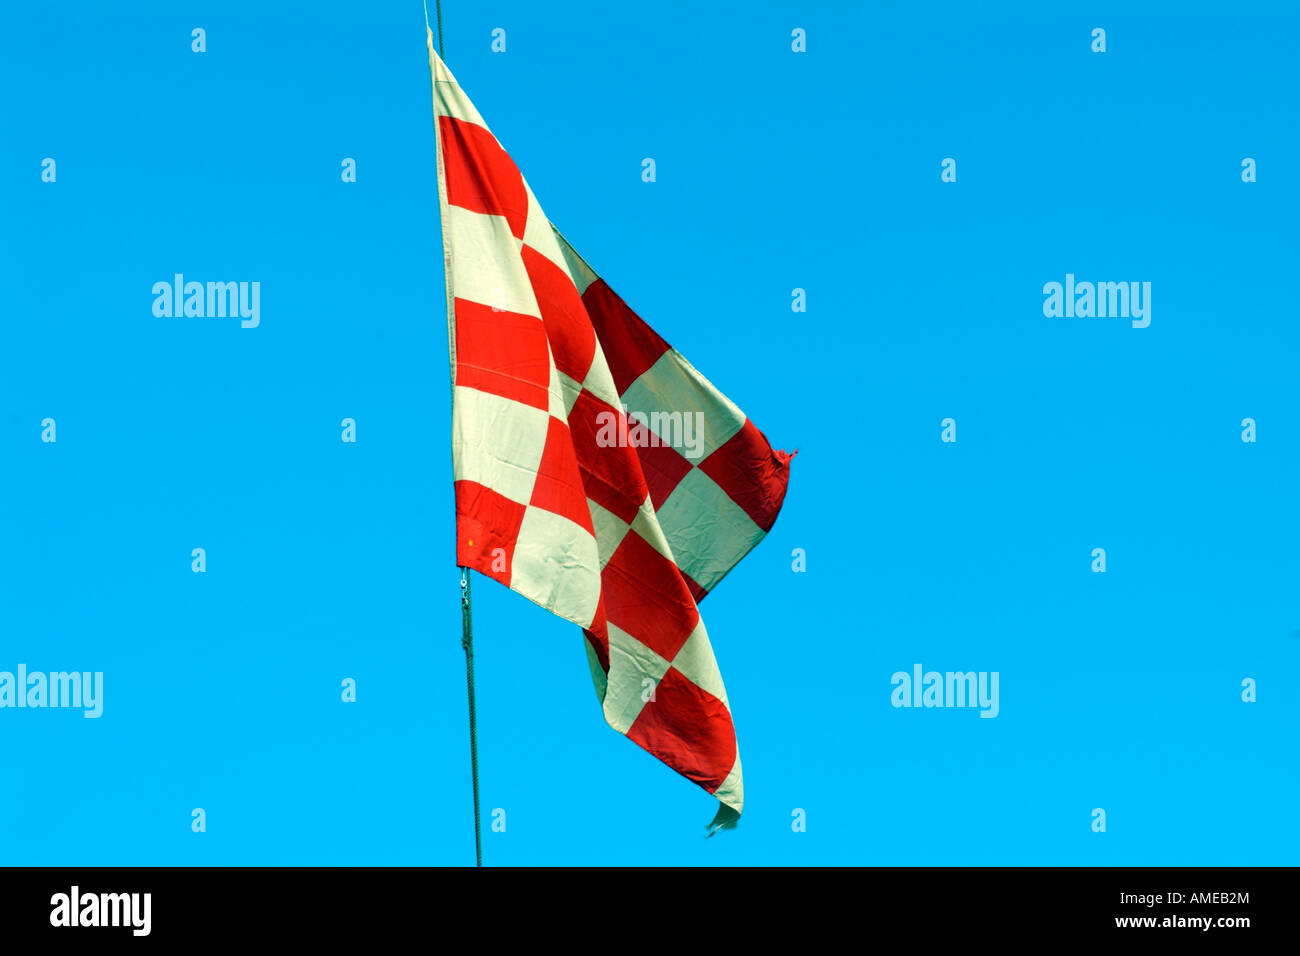 Red And White Checkered Flag Flying Against A Blue Sky Stock Photo